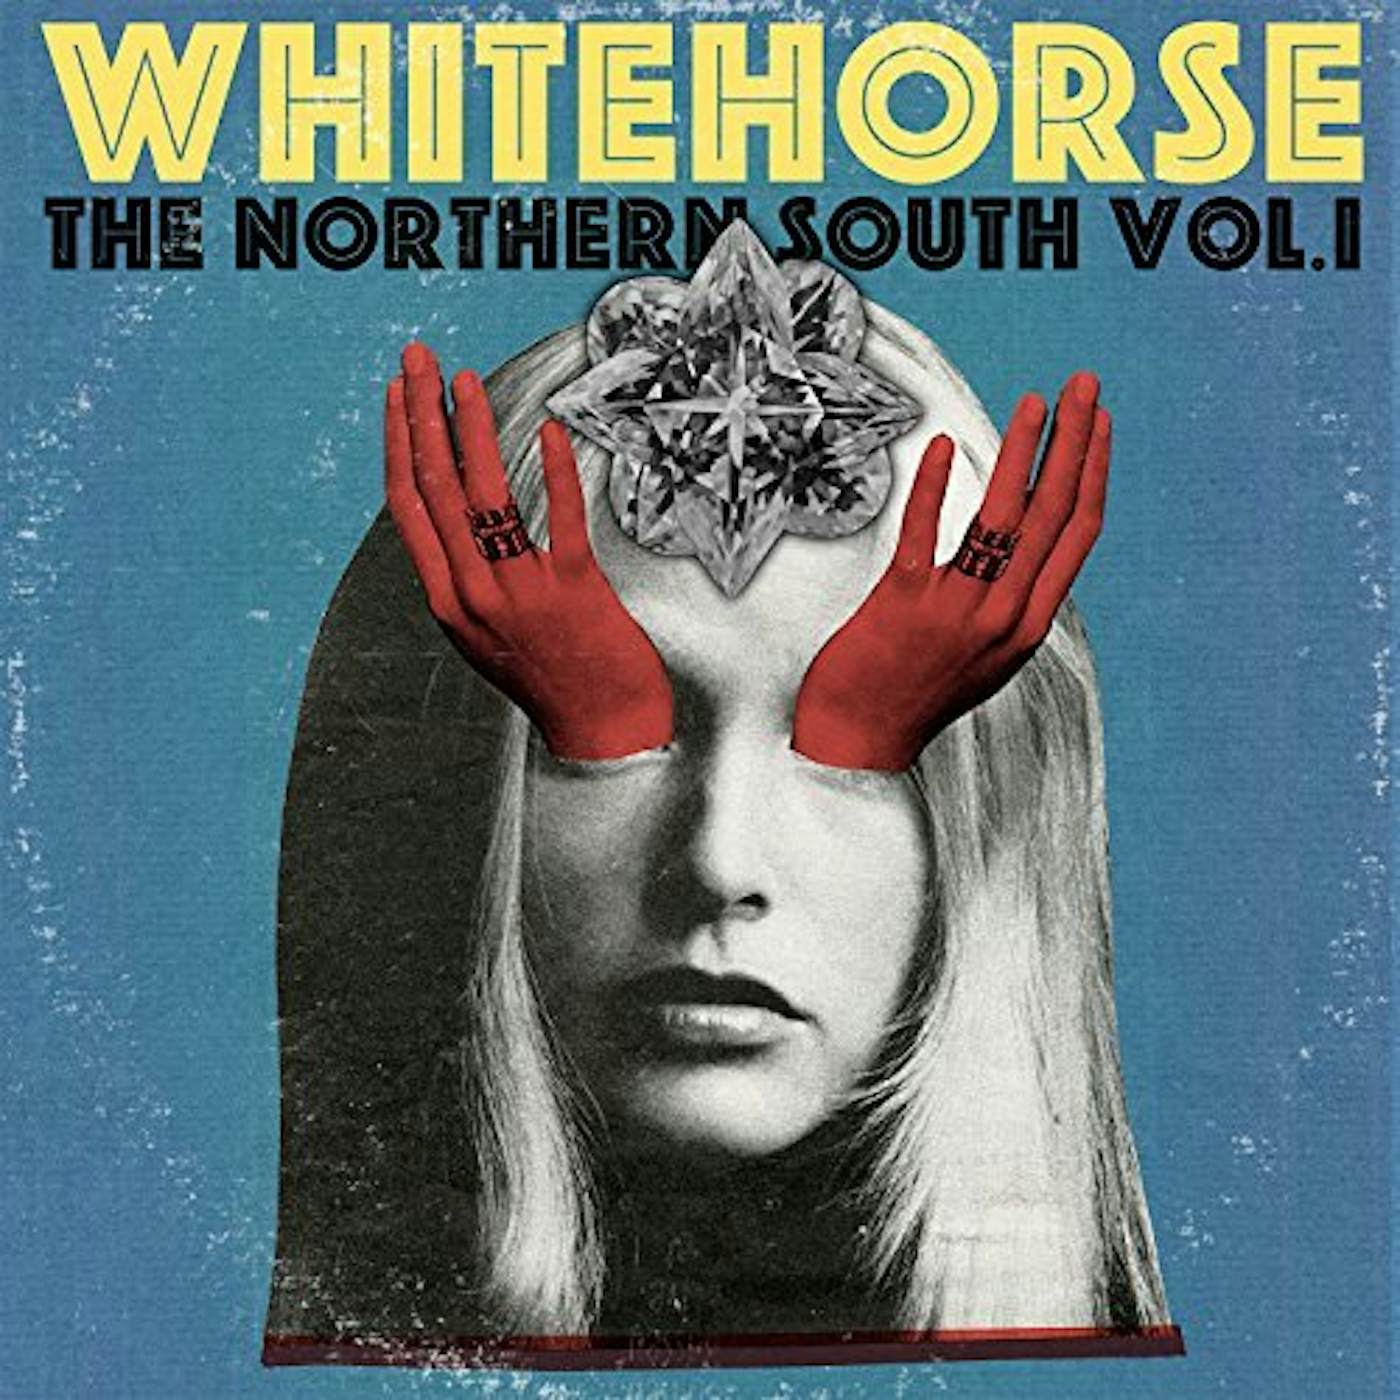 Whitehorse NORTHERN SOUTH 1 CD